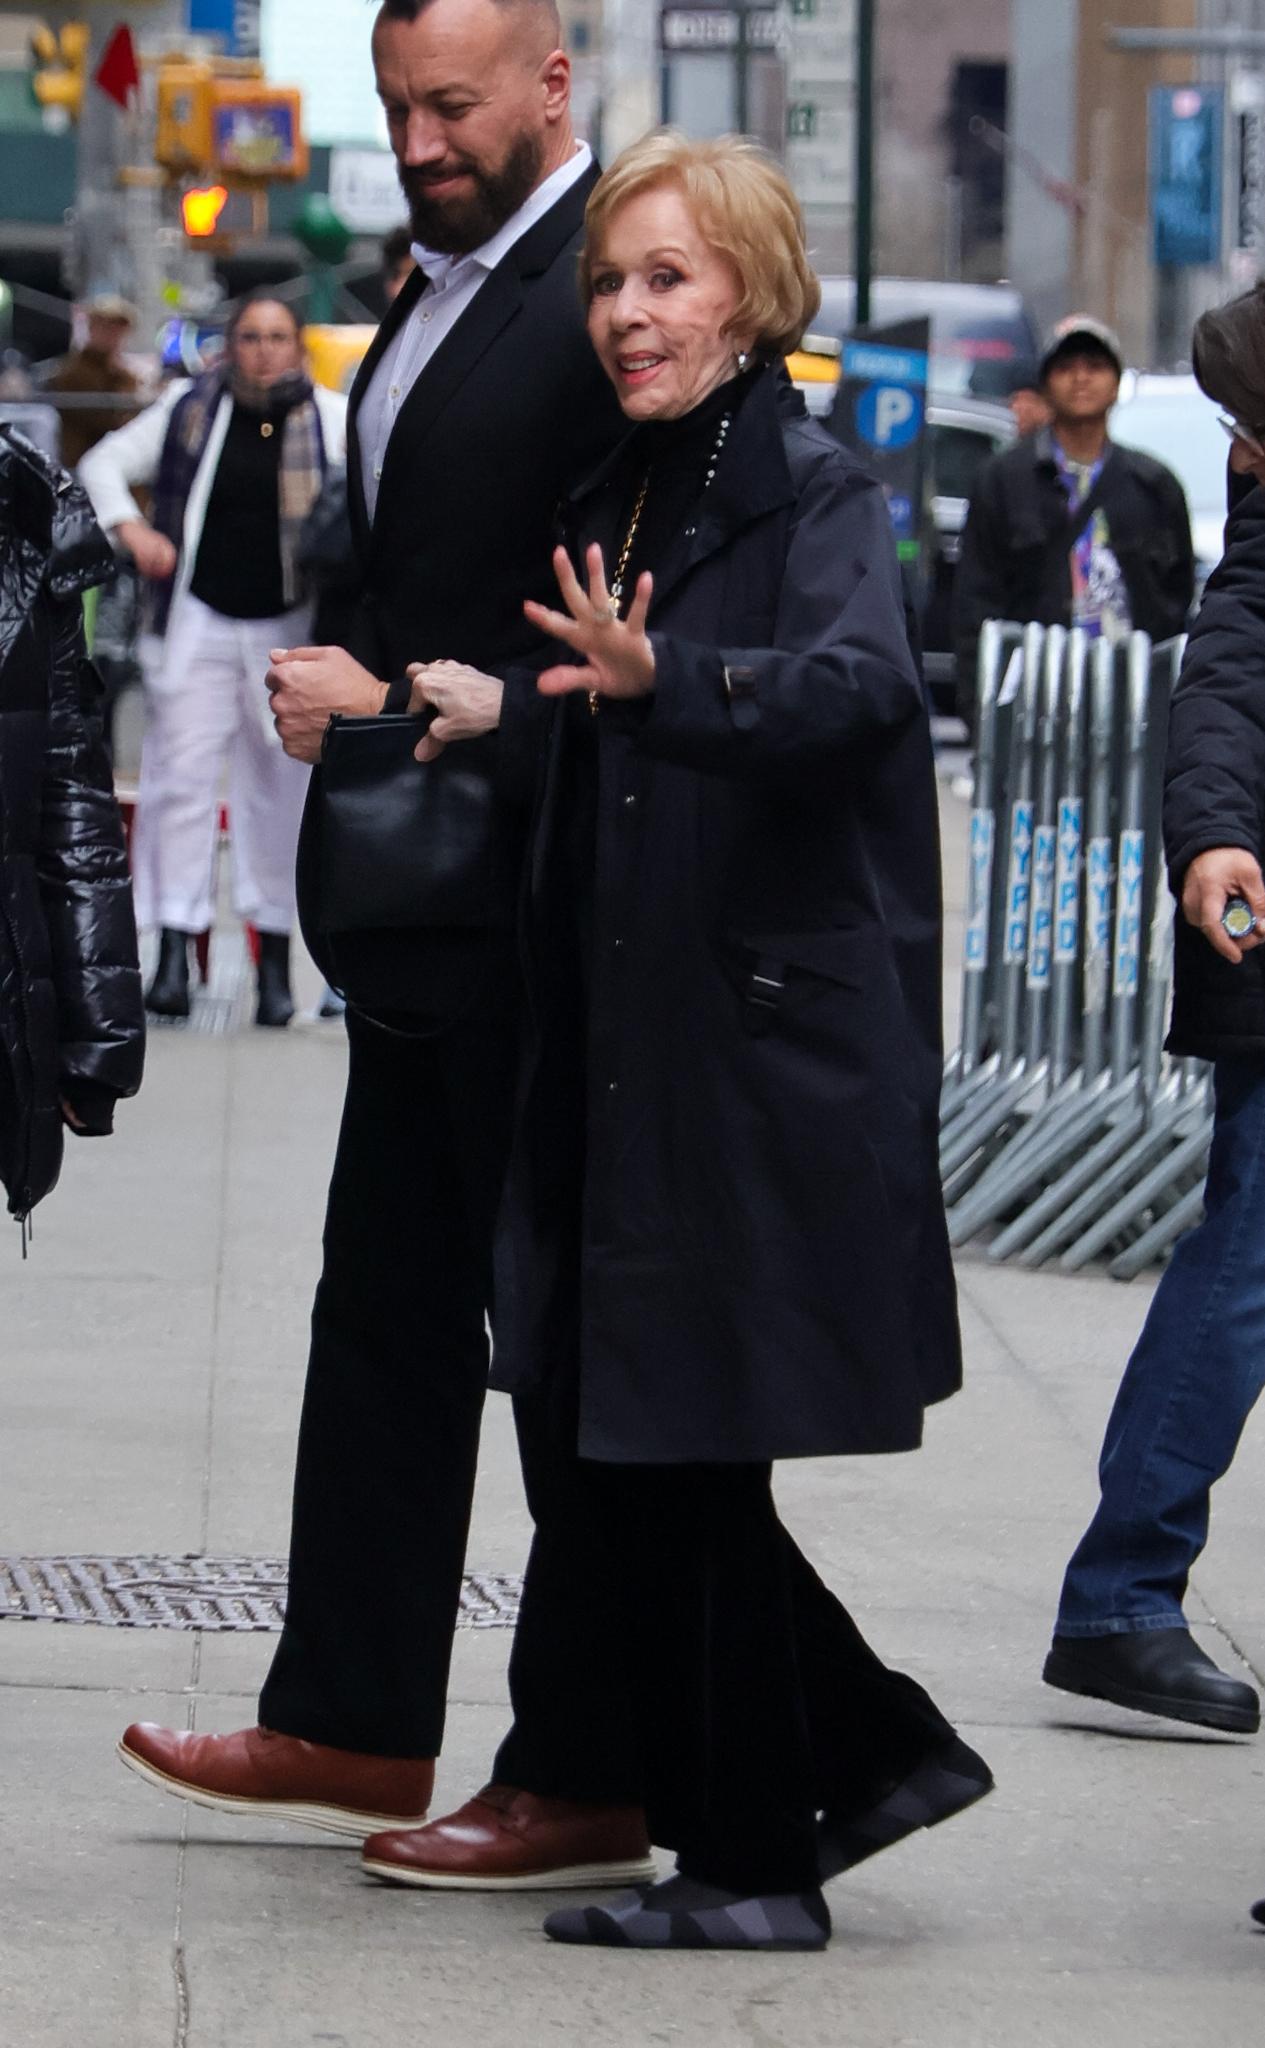 Comedy legend Carol Burnett seen arriving for an appearance this evening on the Late Show with Stephen Colbert in New York City